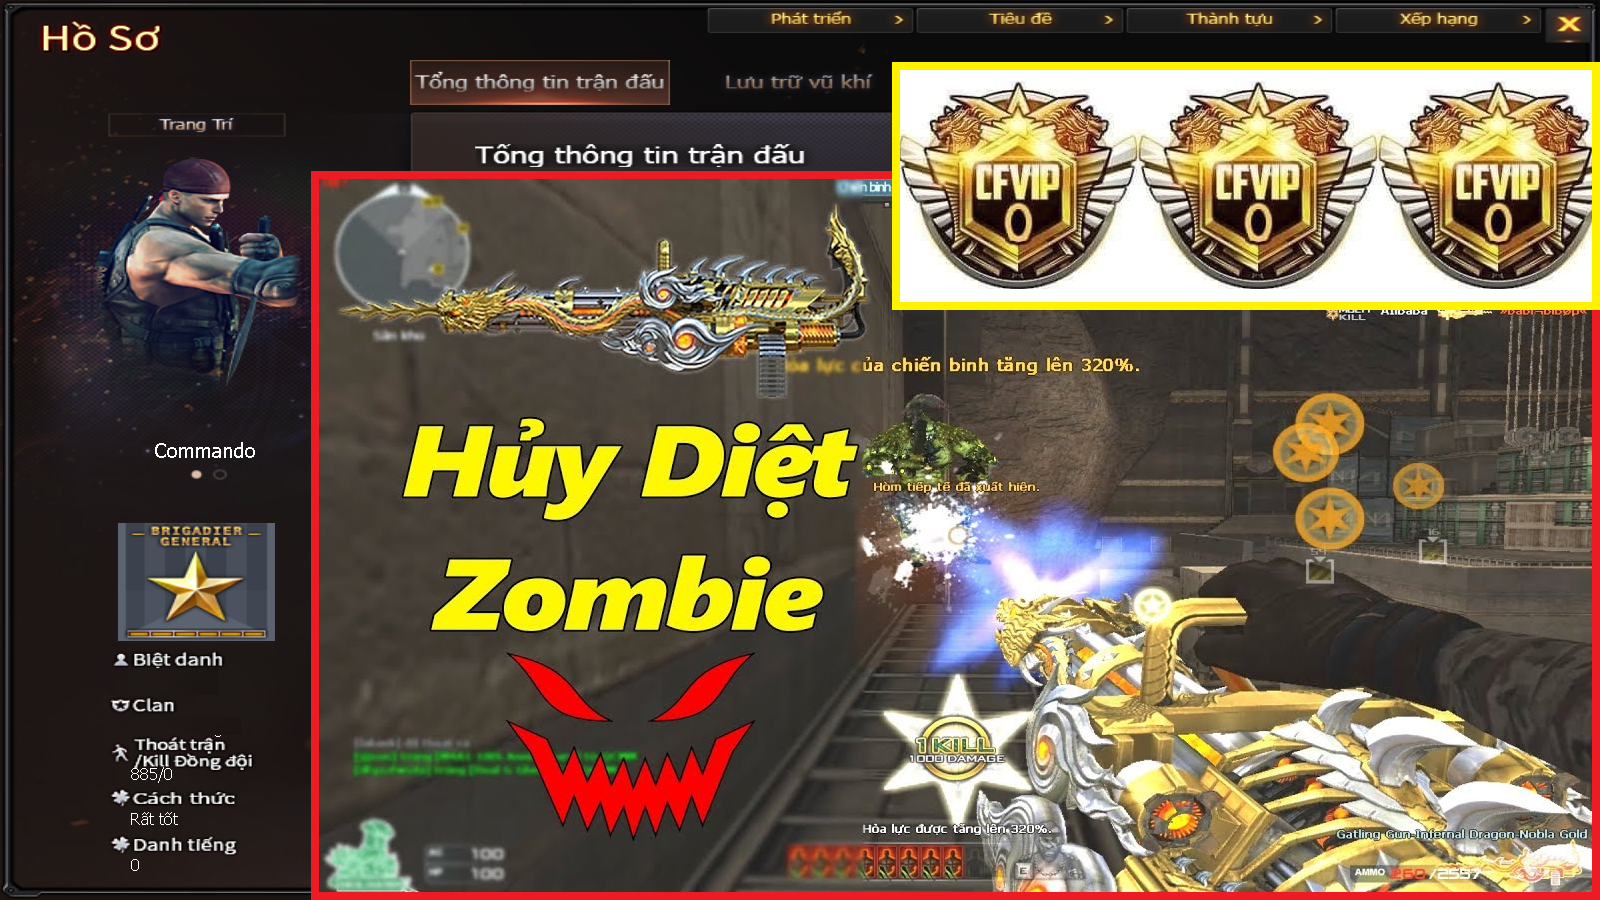 ◉ Zombie Rẻ ◉ 6N Noble Gold...